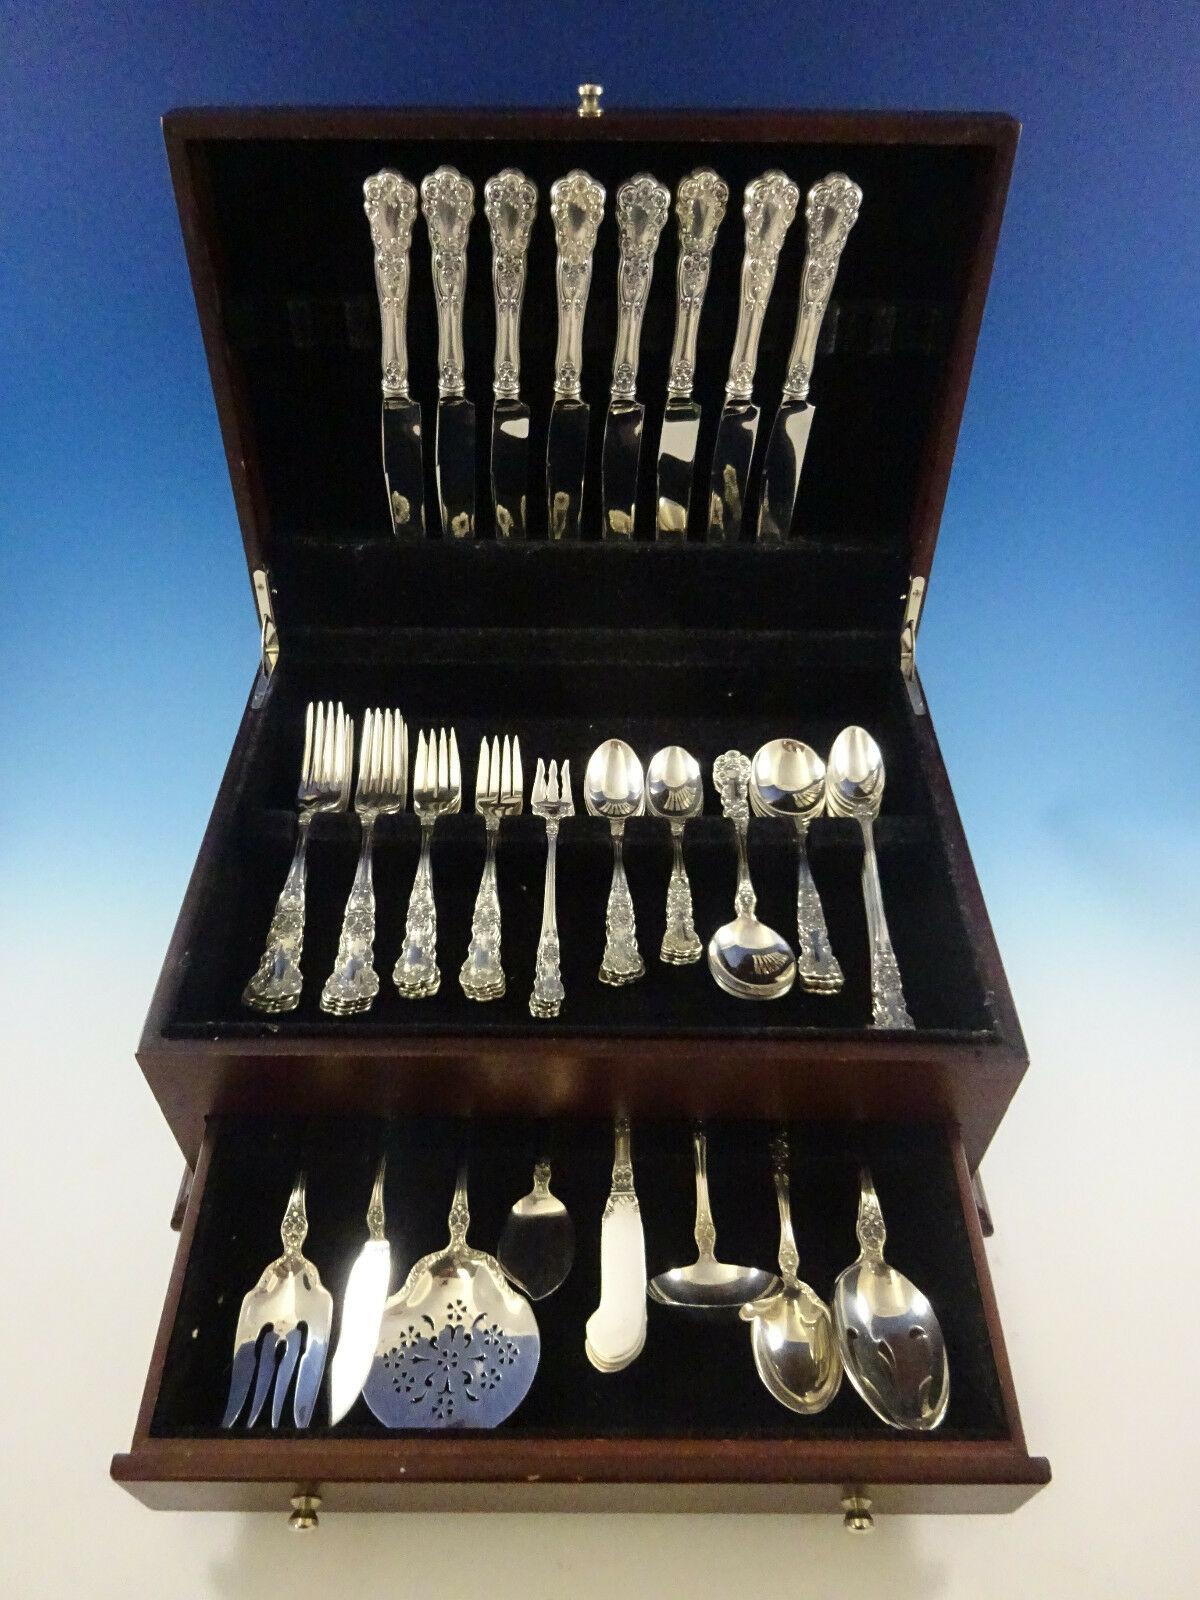 Buttercup by Gorham sterling silver dinner size flatware set - 72 pieces. This set includes:

8 dinner size knives, 9 1/2